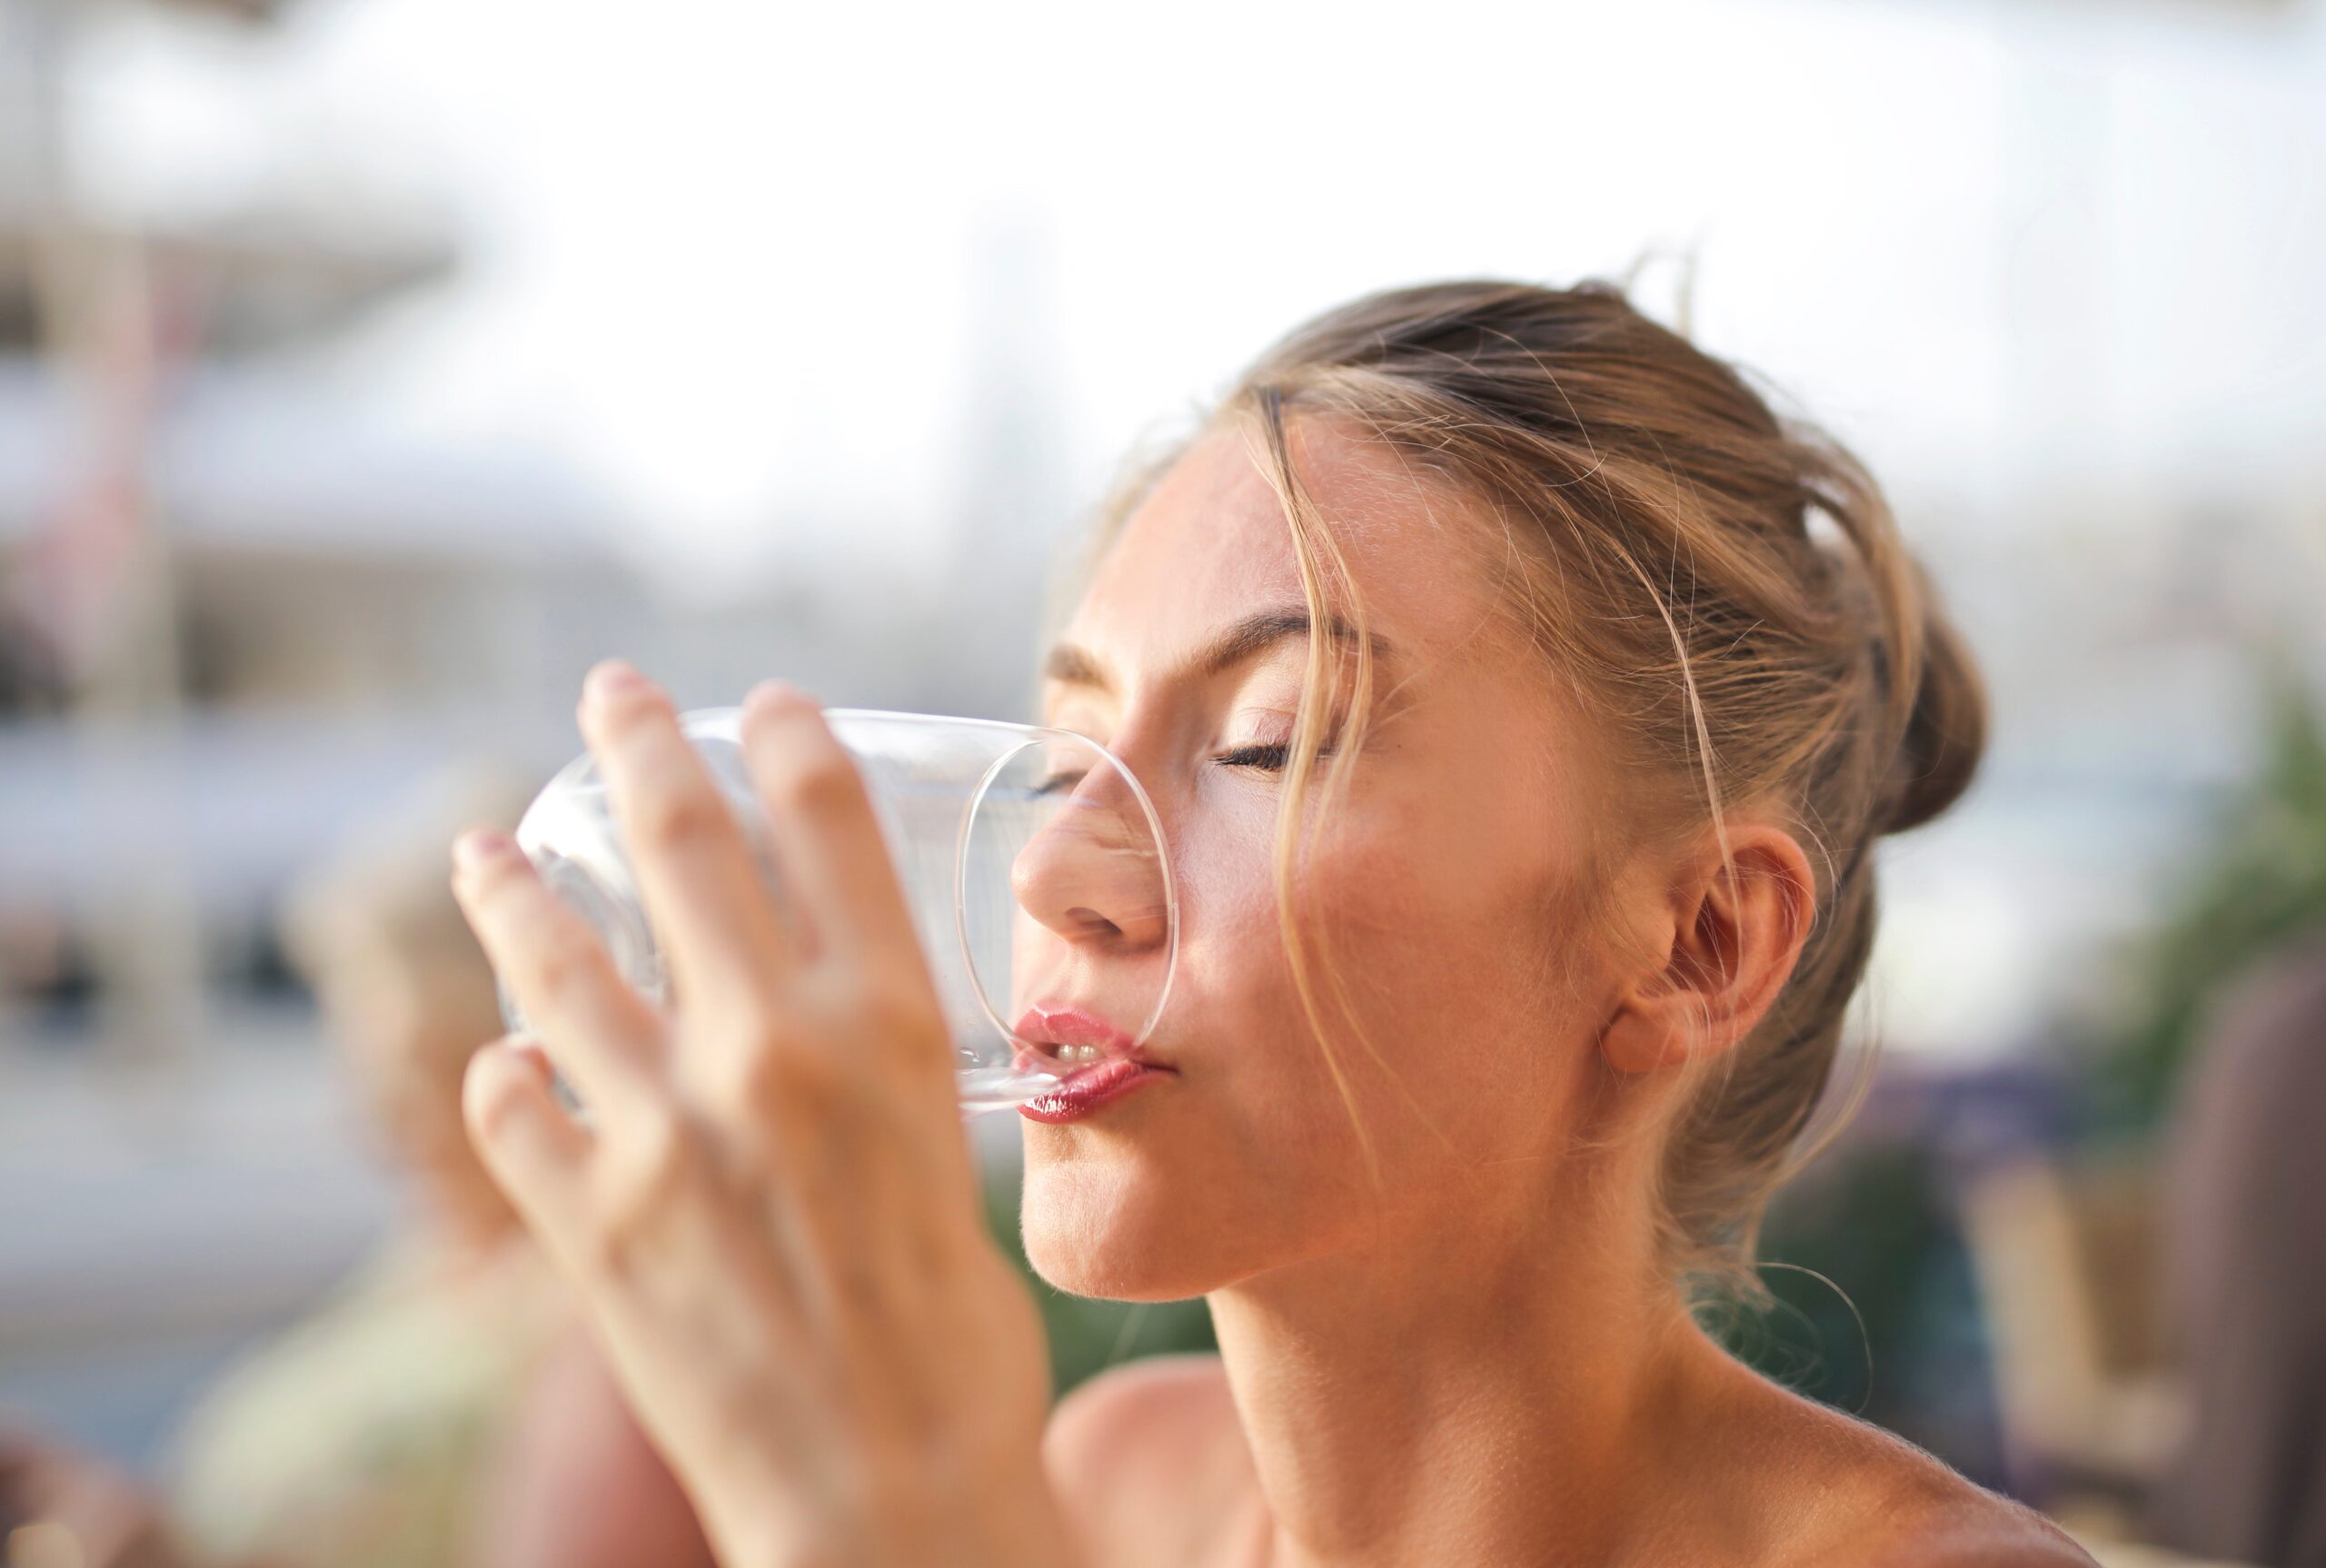 Stay hydrated to help reduce fatigue, tiredness and cravings